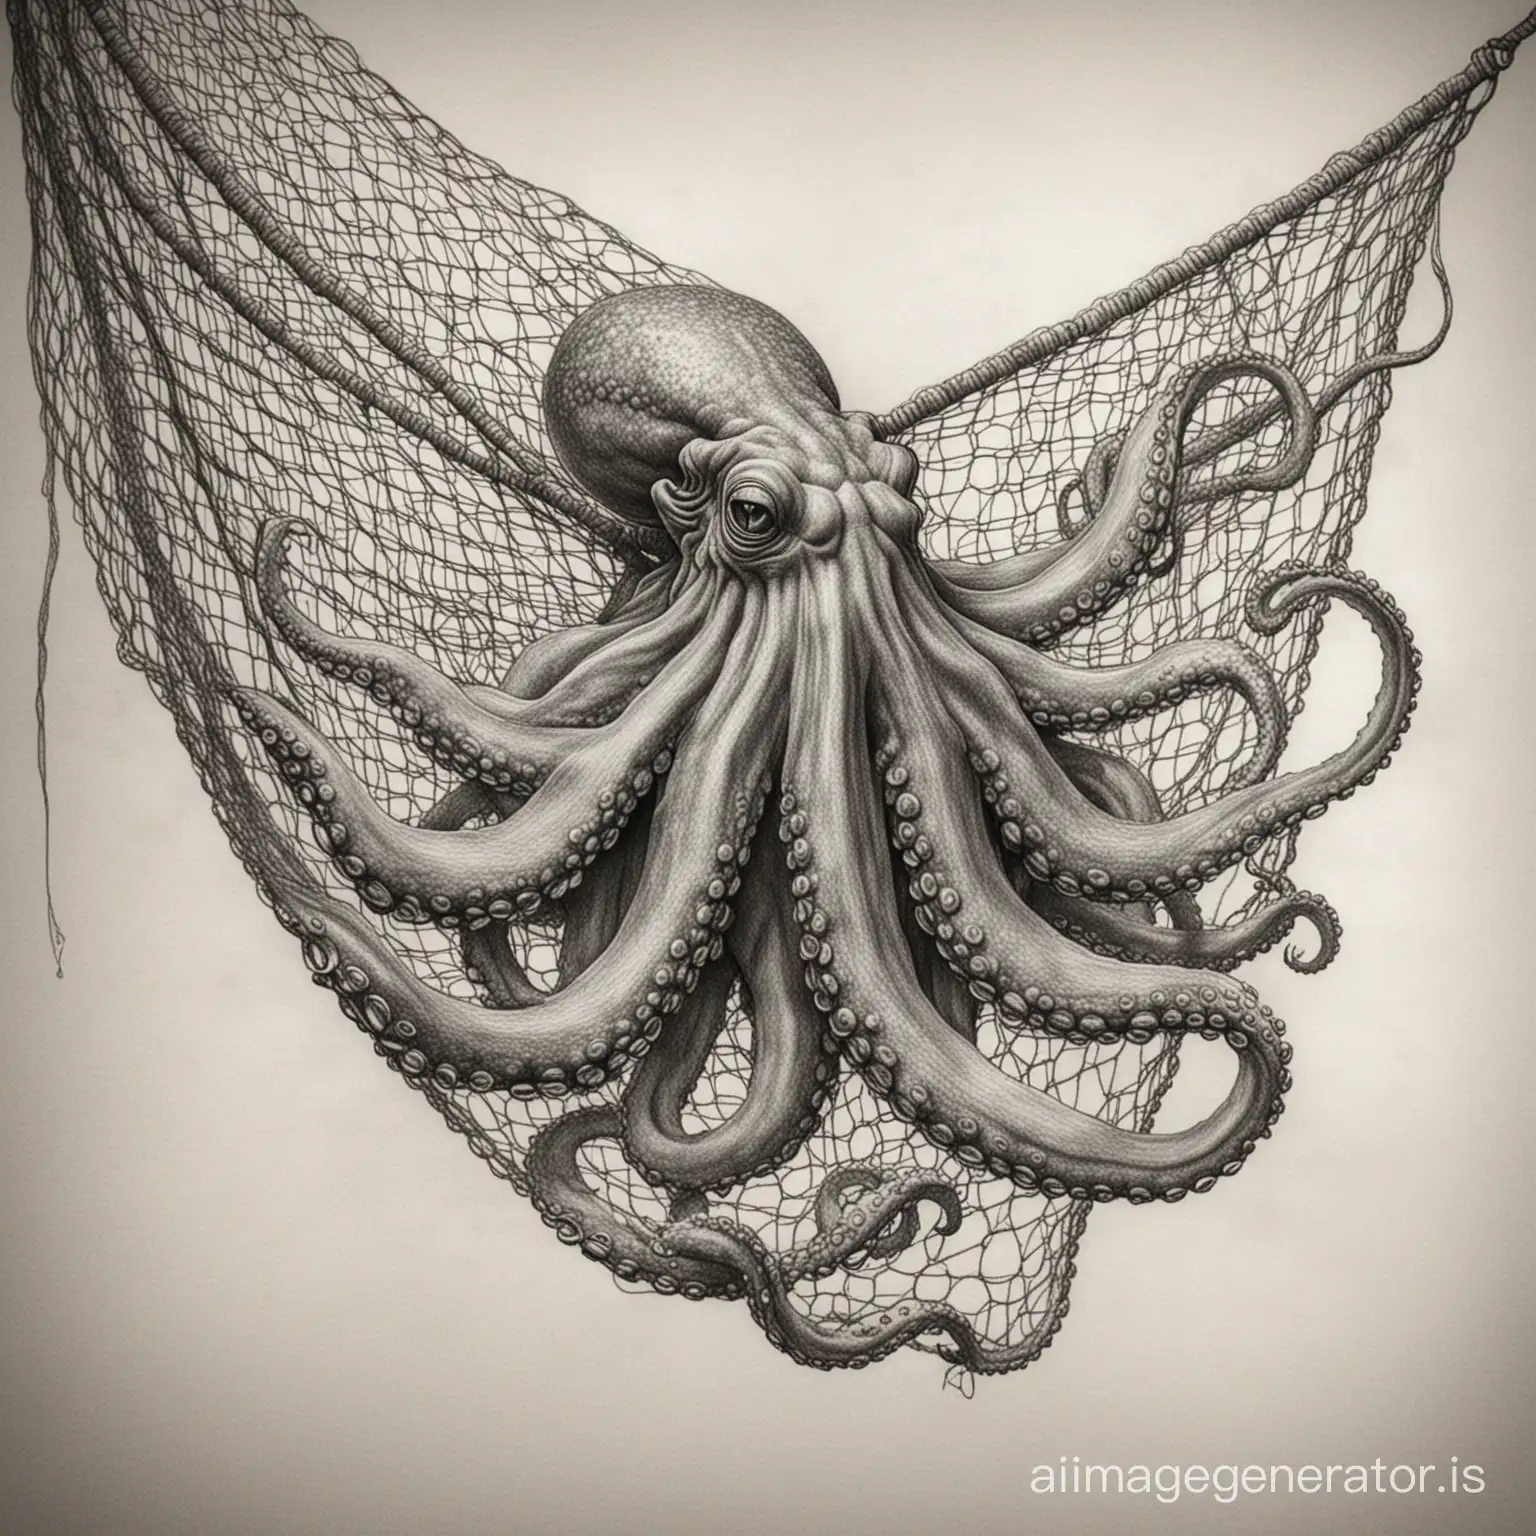 Ultra-Realistic-Octopus-Entangled-in-Fishermans-Net-Pencil-Sketch